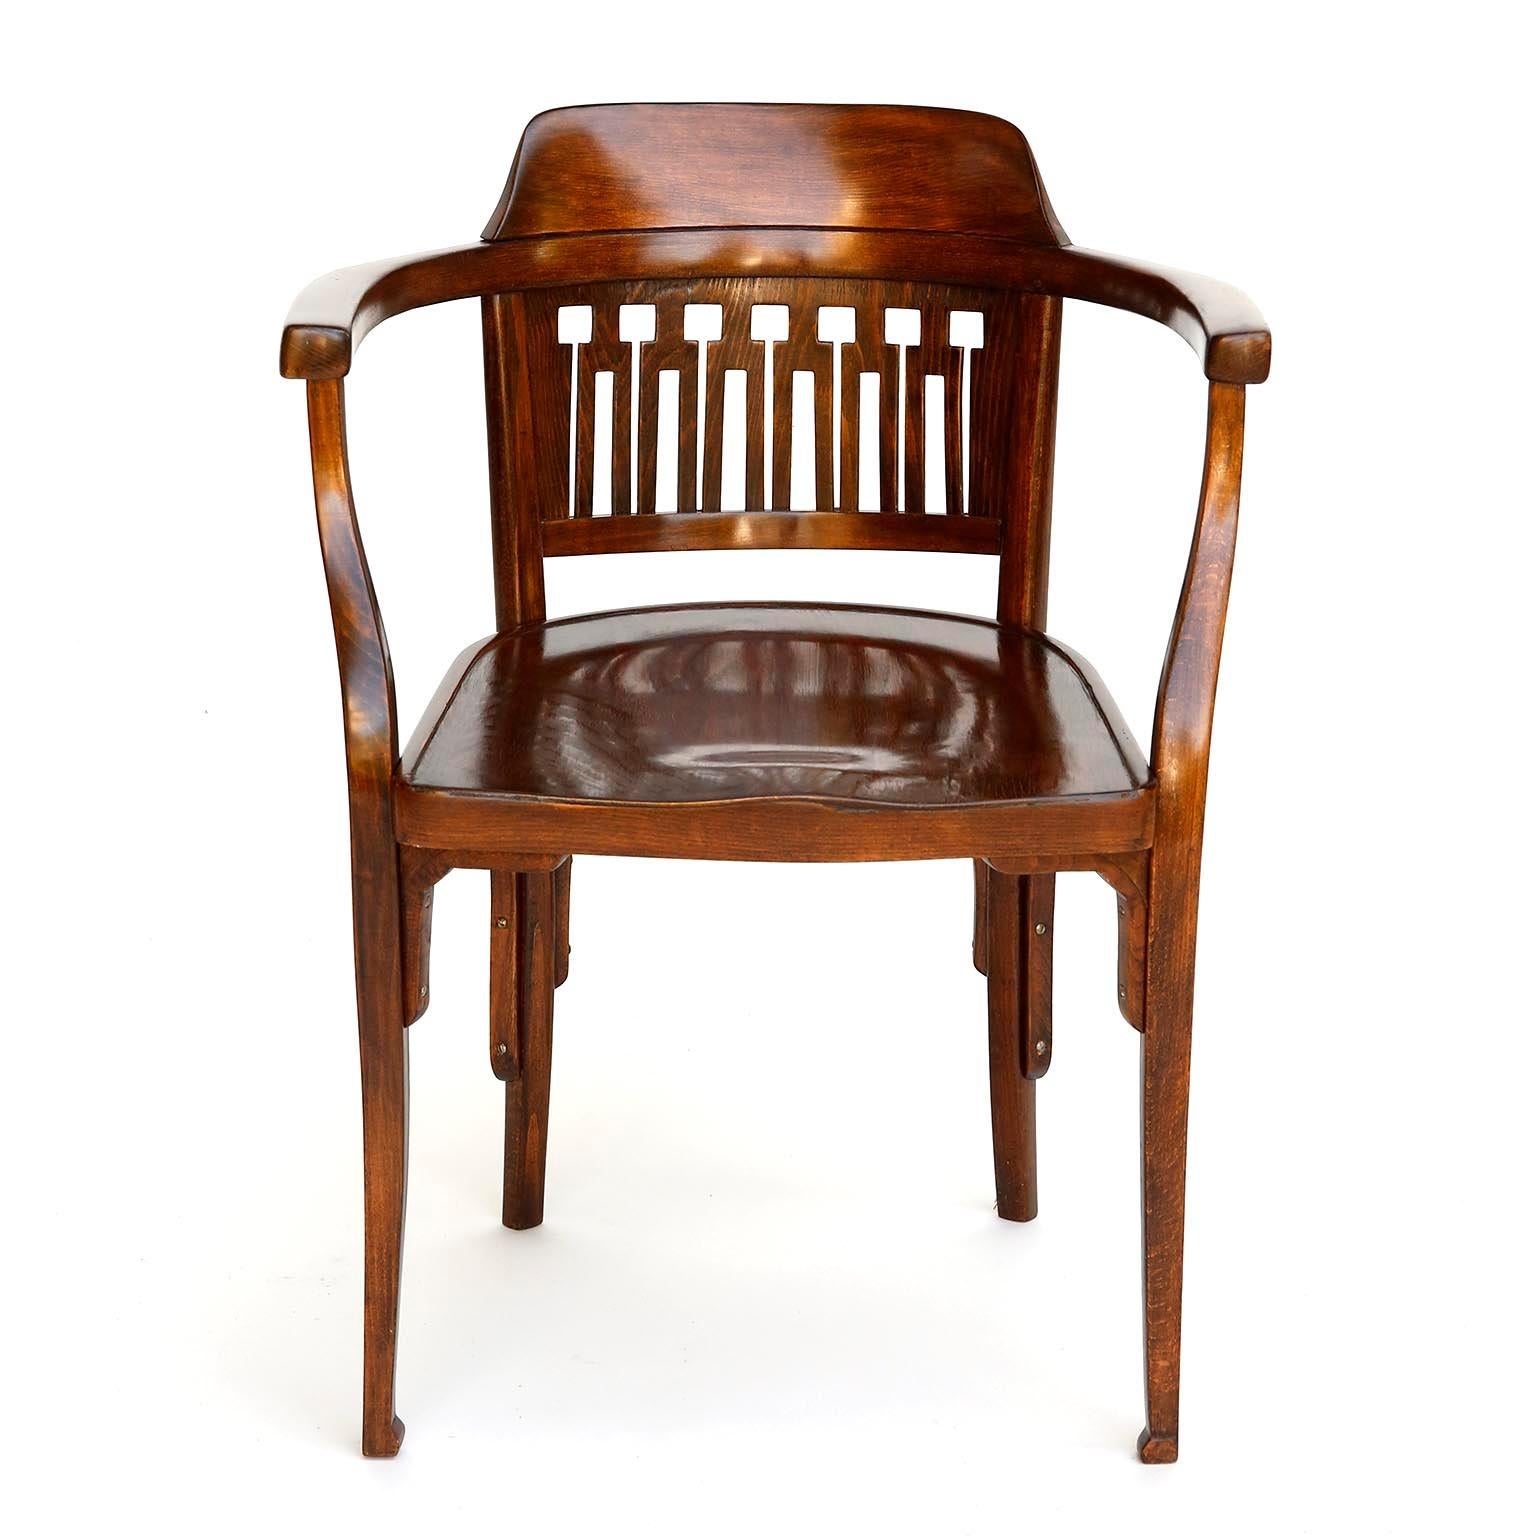 Pair of Otto Wagner Chairs Armchairs by J.&J. Kohn, Austria, Vienna Secession 1